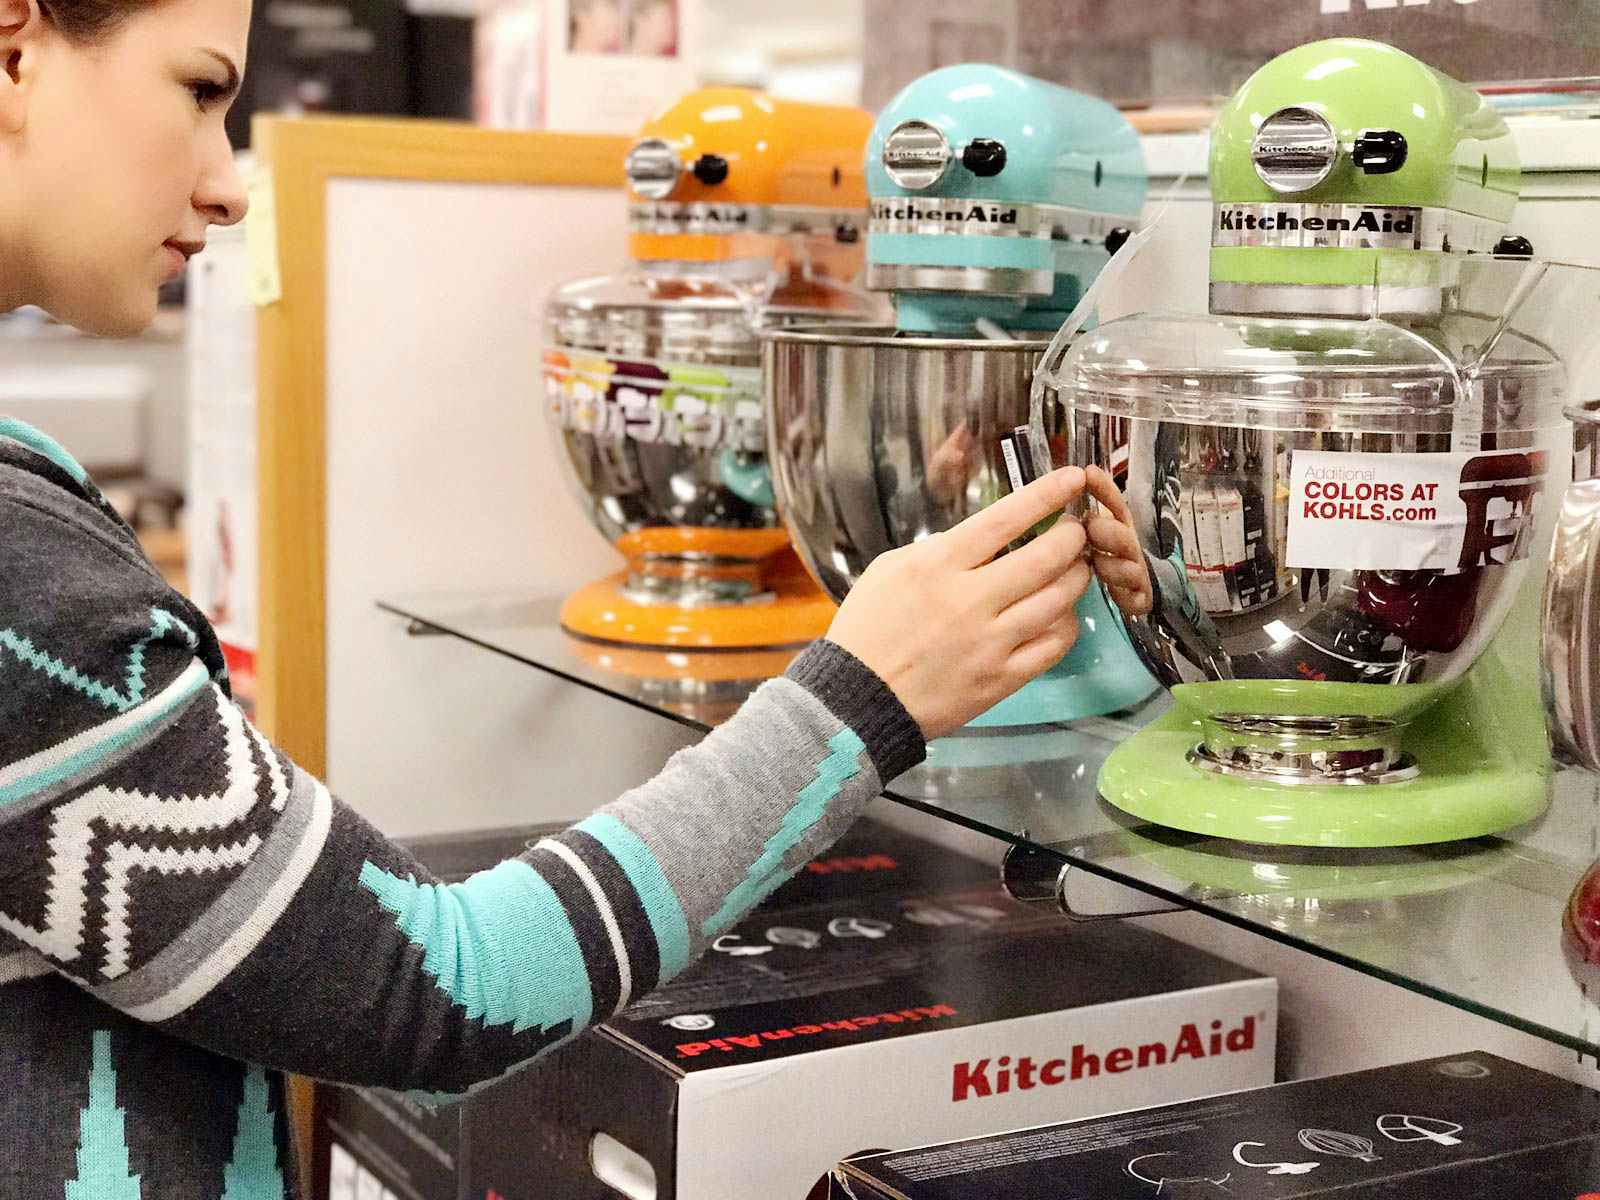 Person looking at Kitchen aid mixers inside a department store